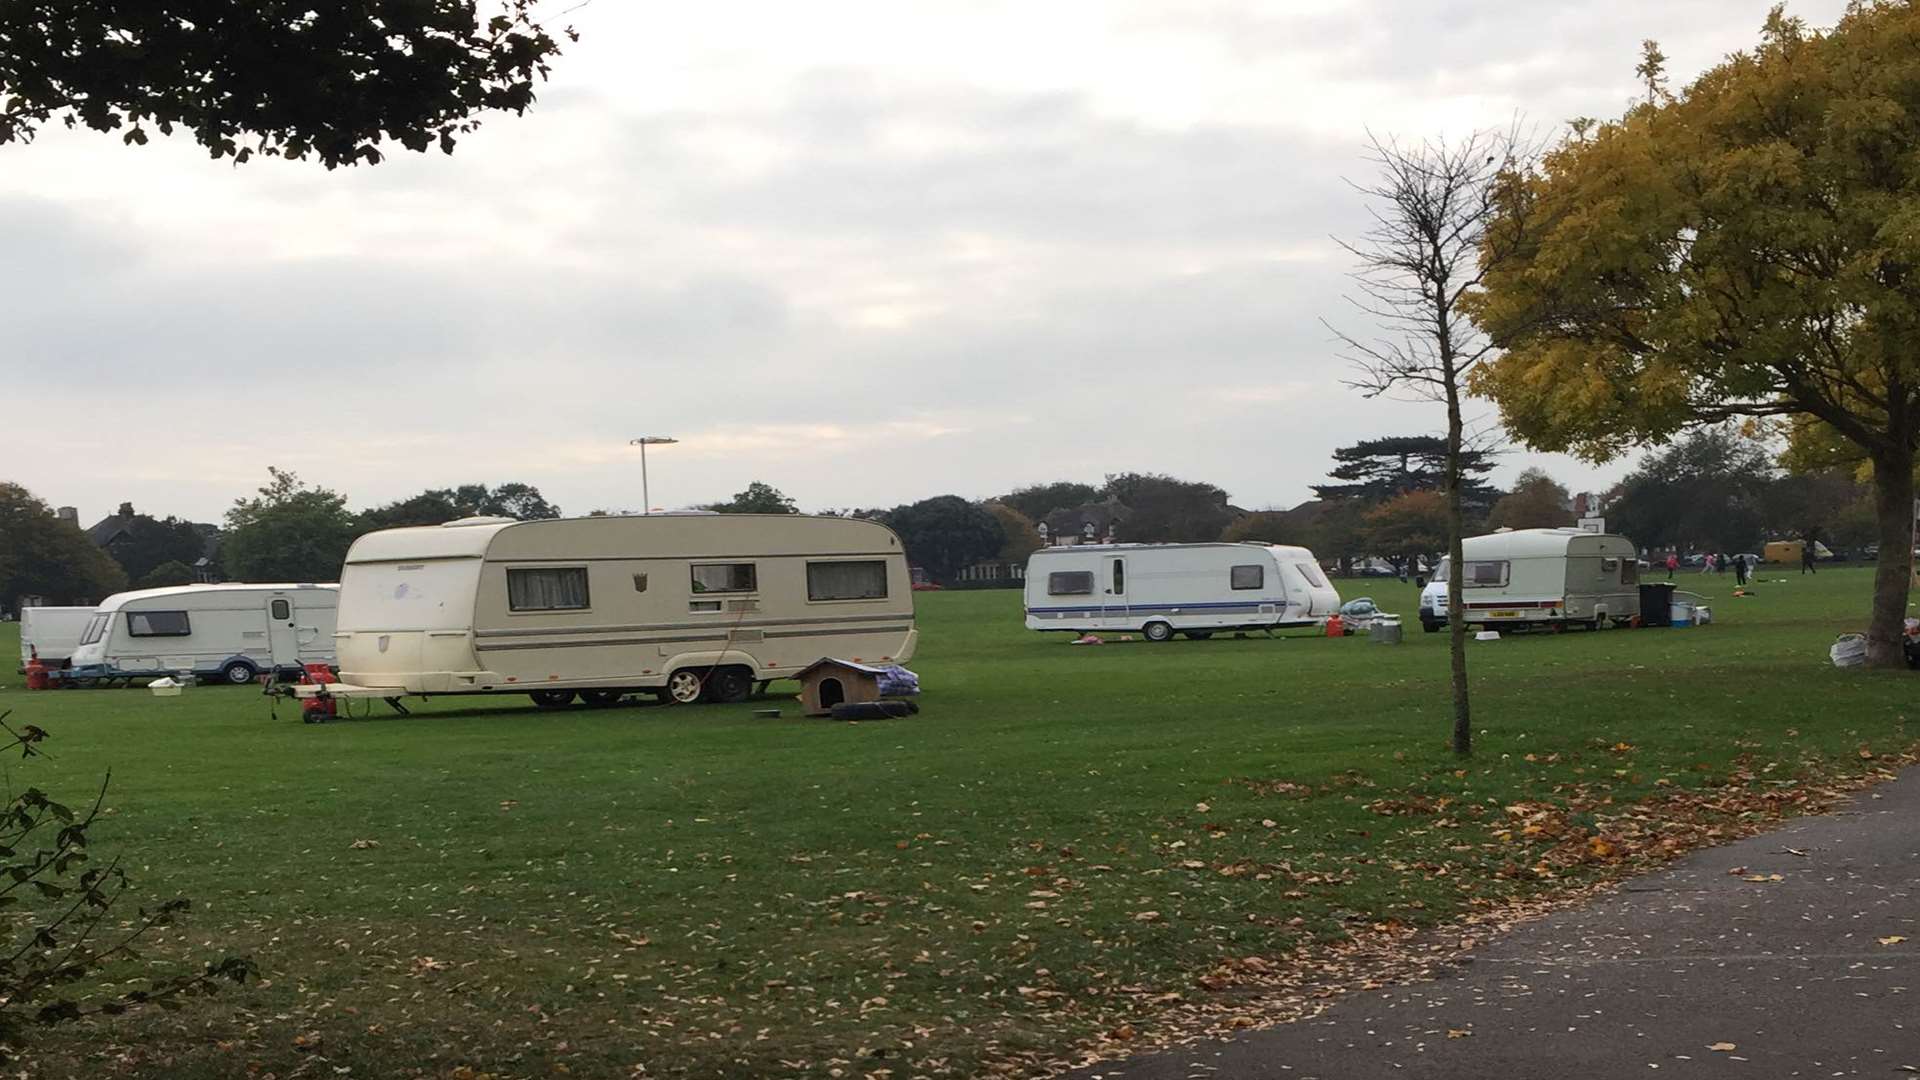 There were just six caravans present at 4pm on Monday